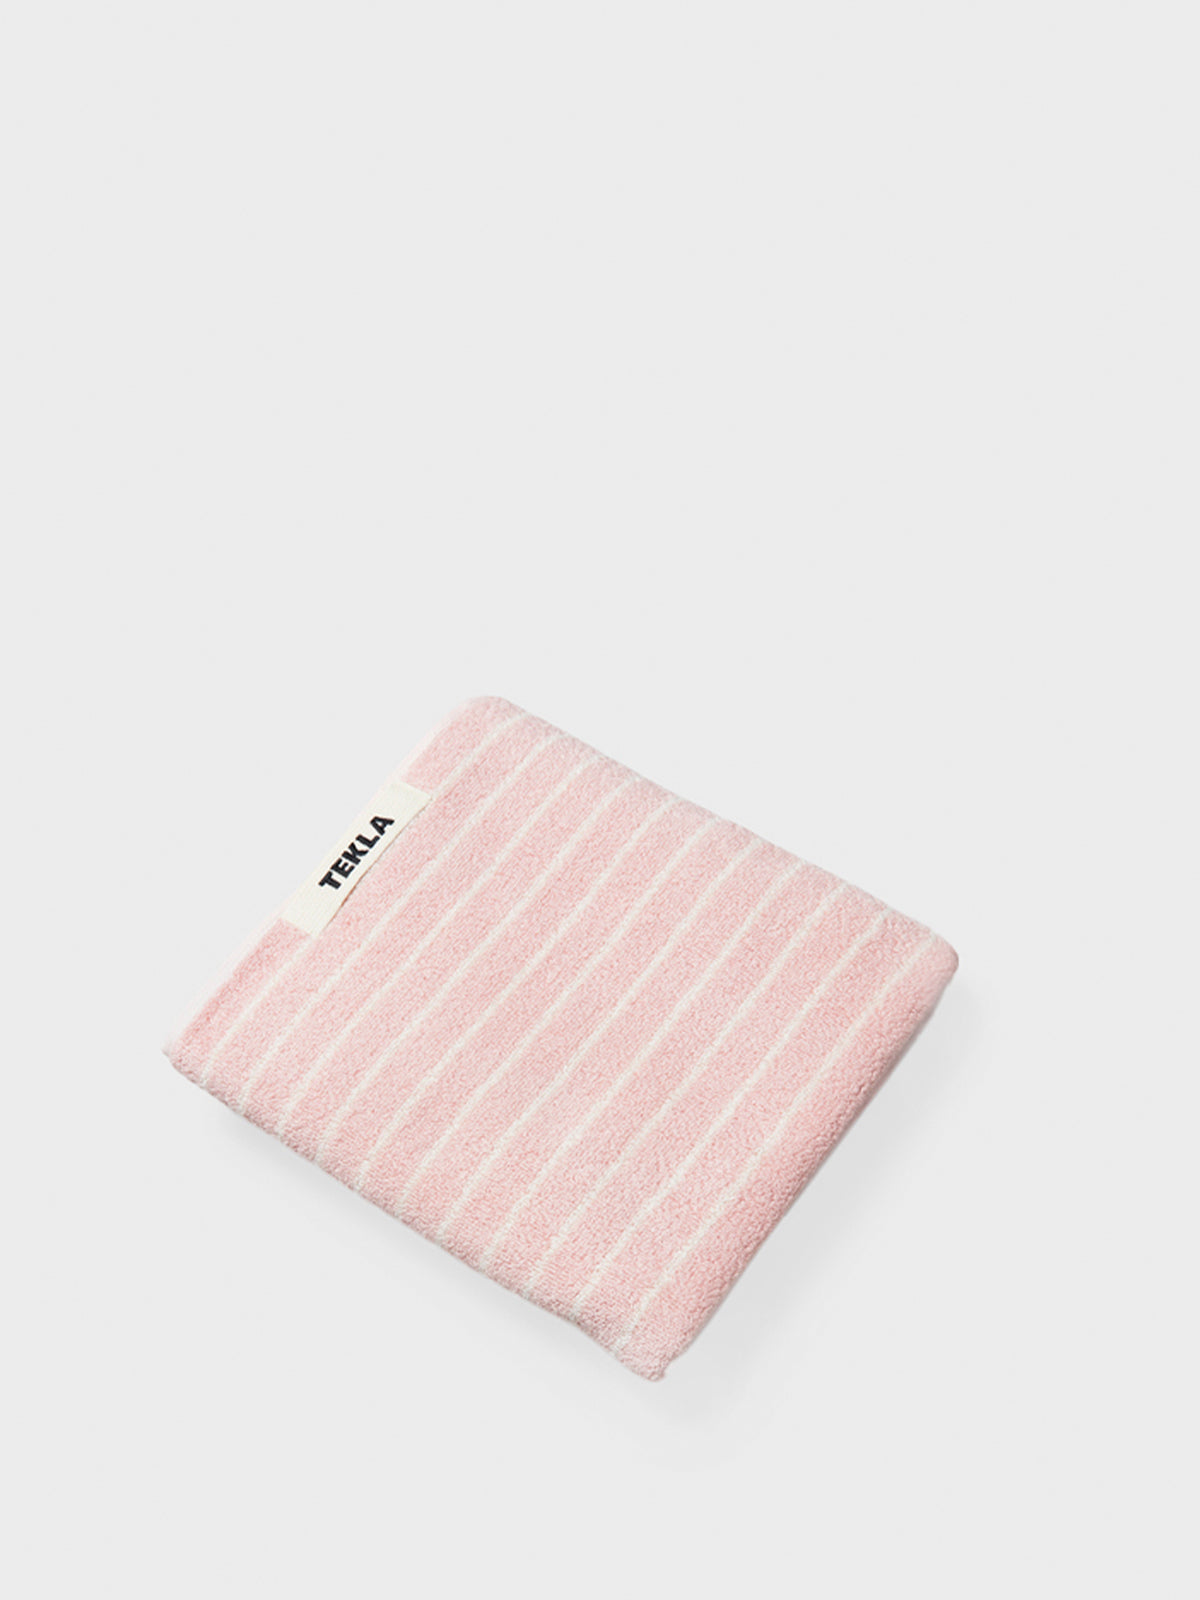 Tekla - Hand Towel in Shaded Pink Stripes